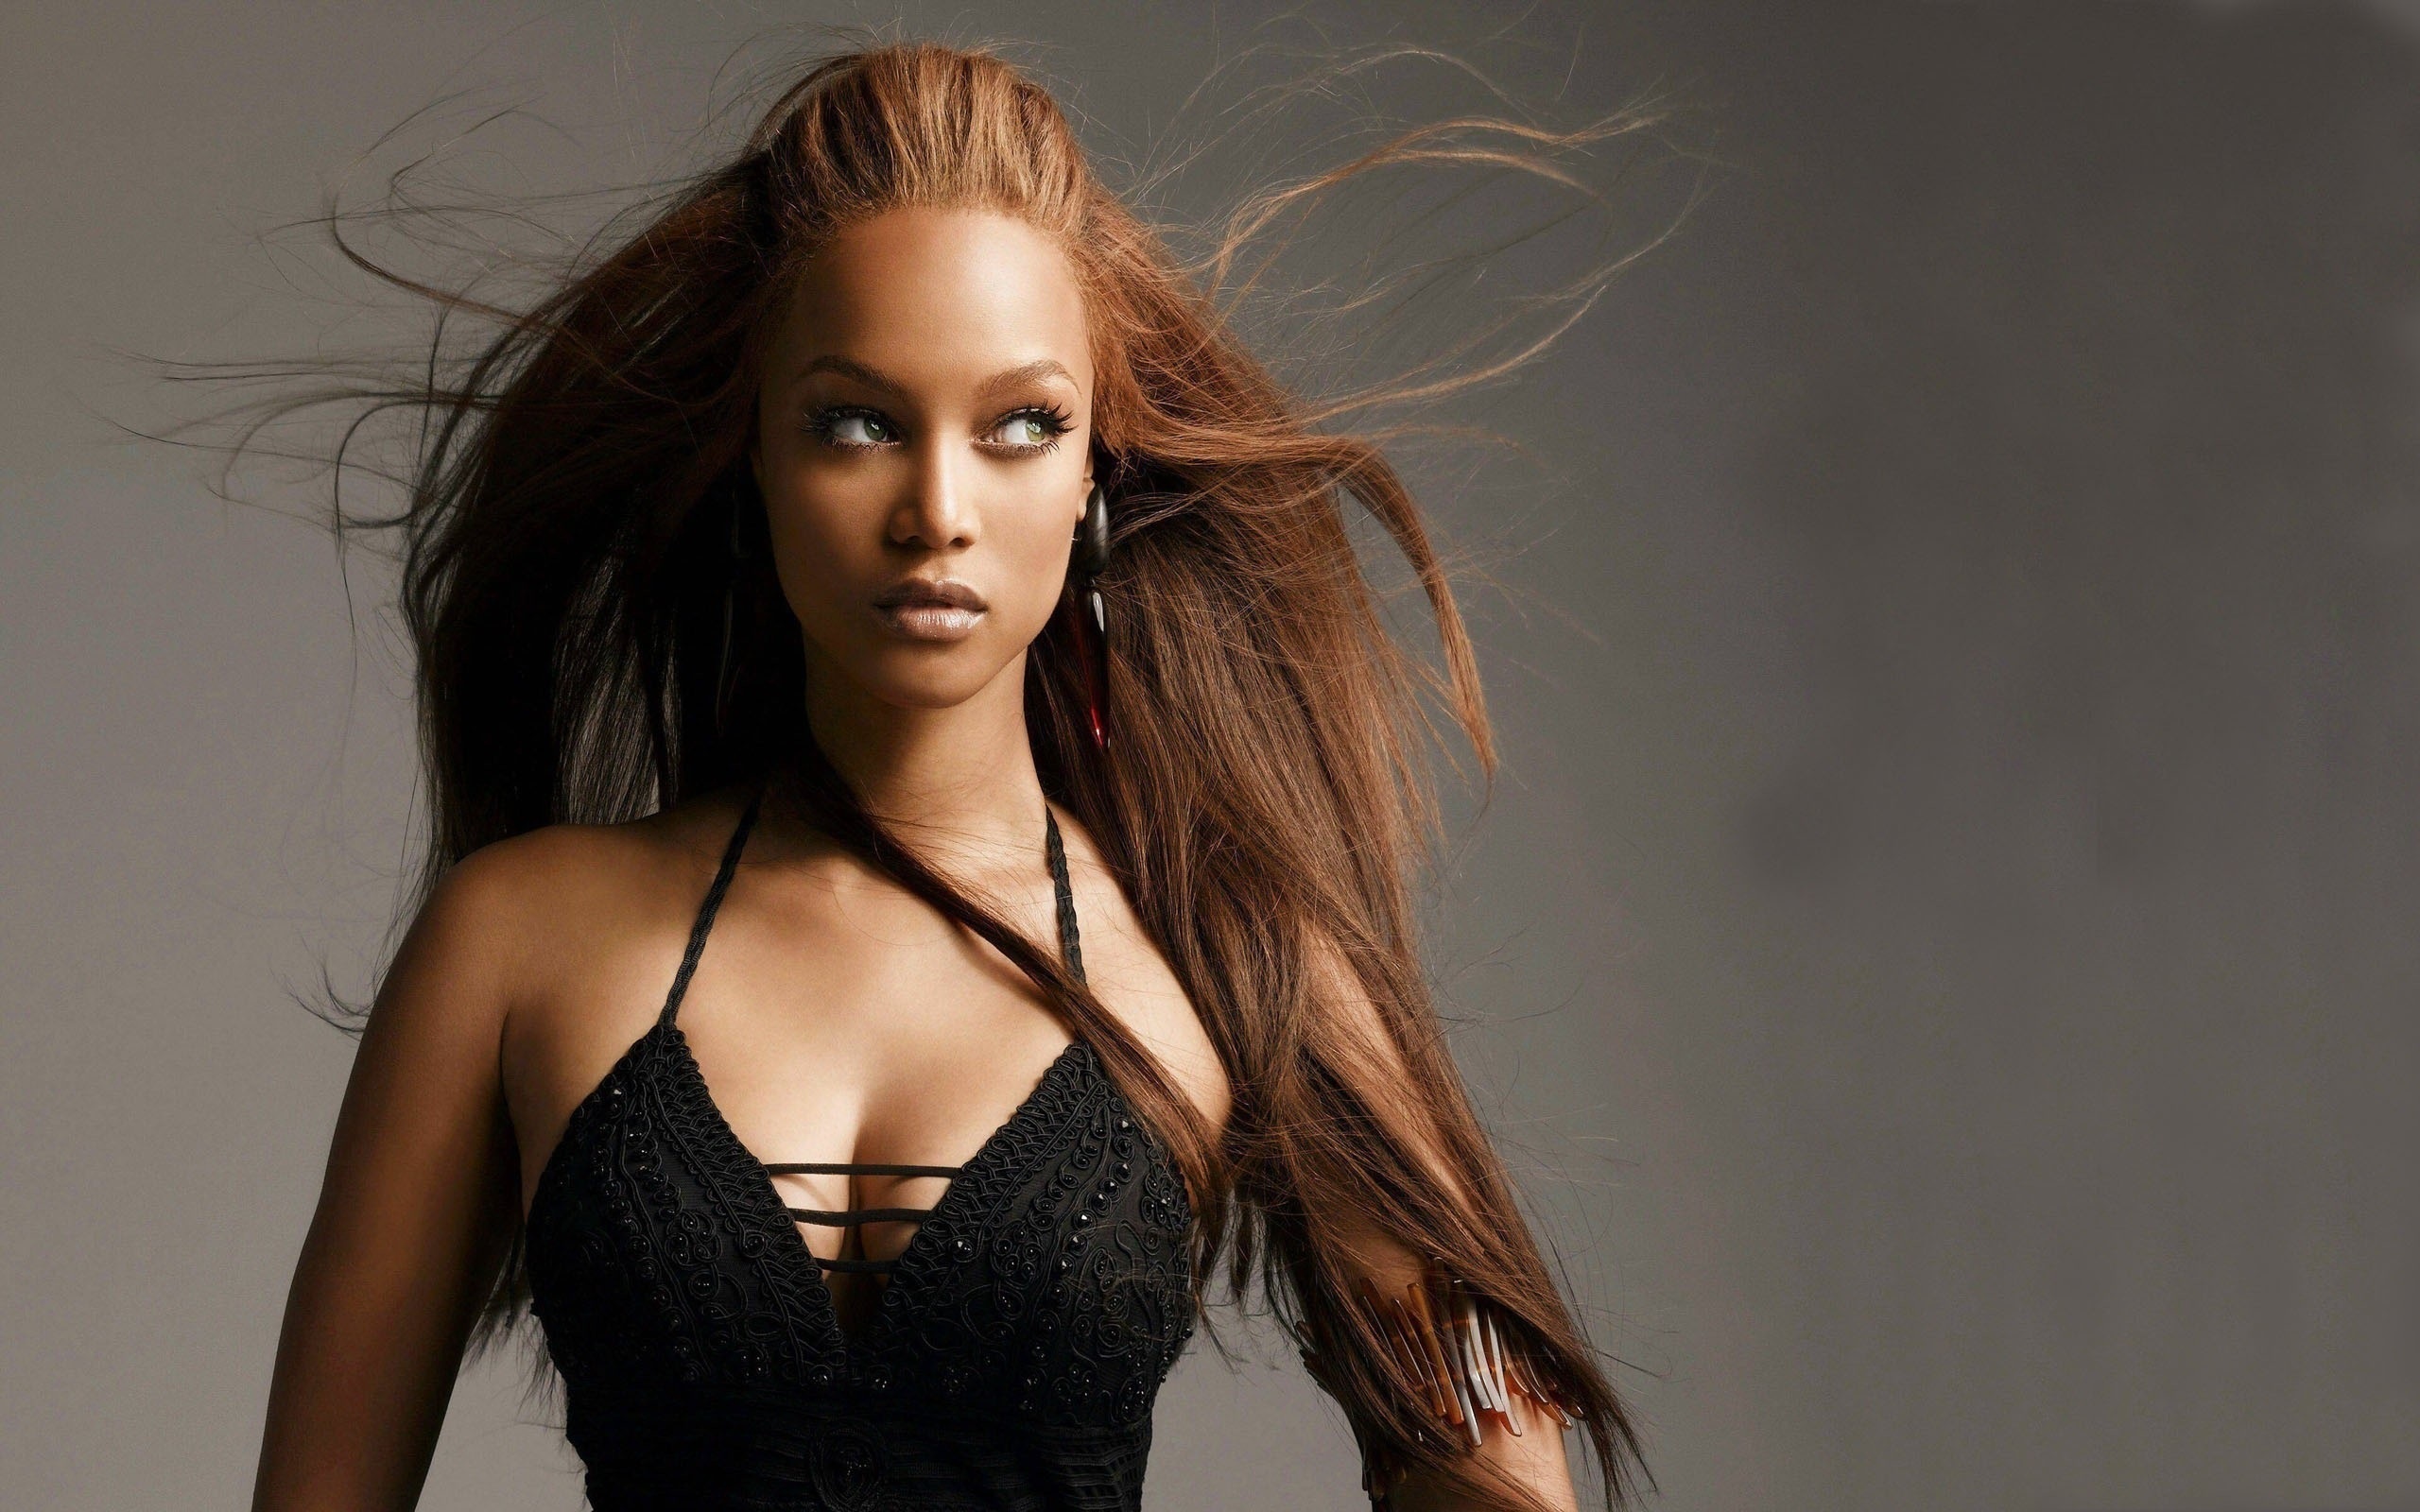 Tyra Banks, Free wallpapers, Photos images pictures, Elizabeth 2019, 2560x1600 HD Desktop